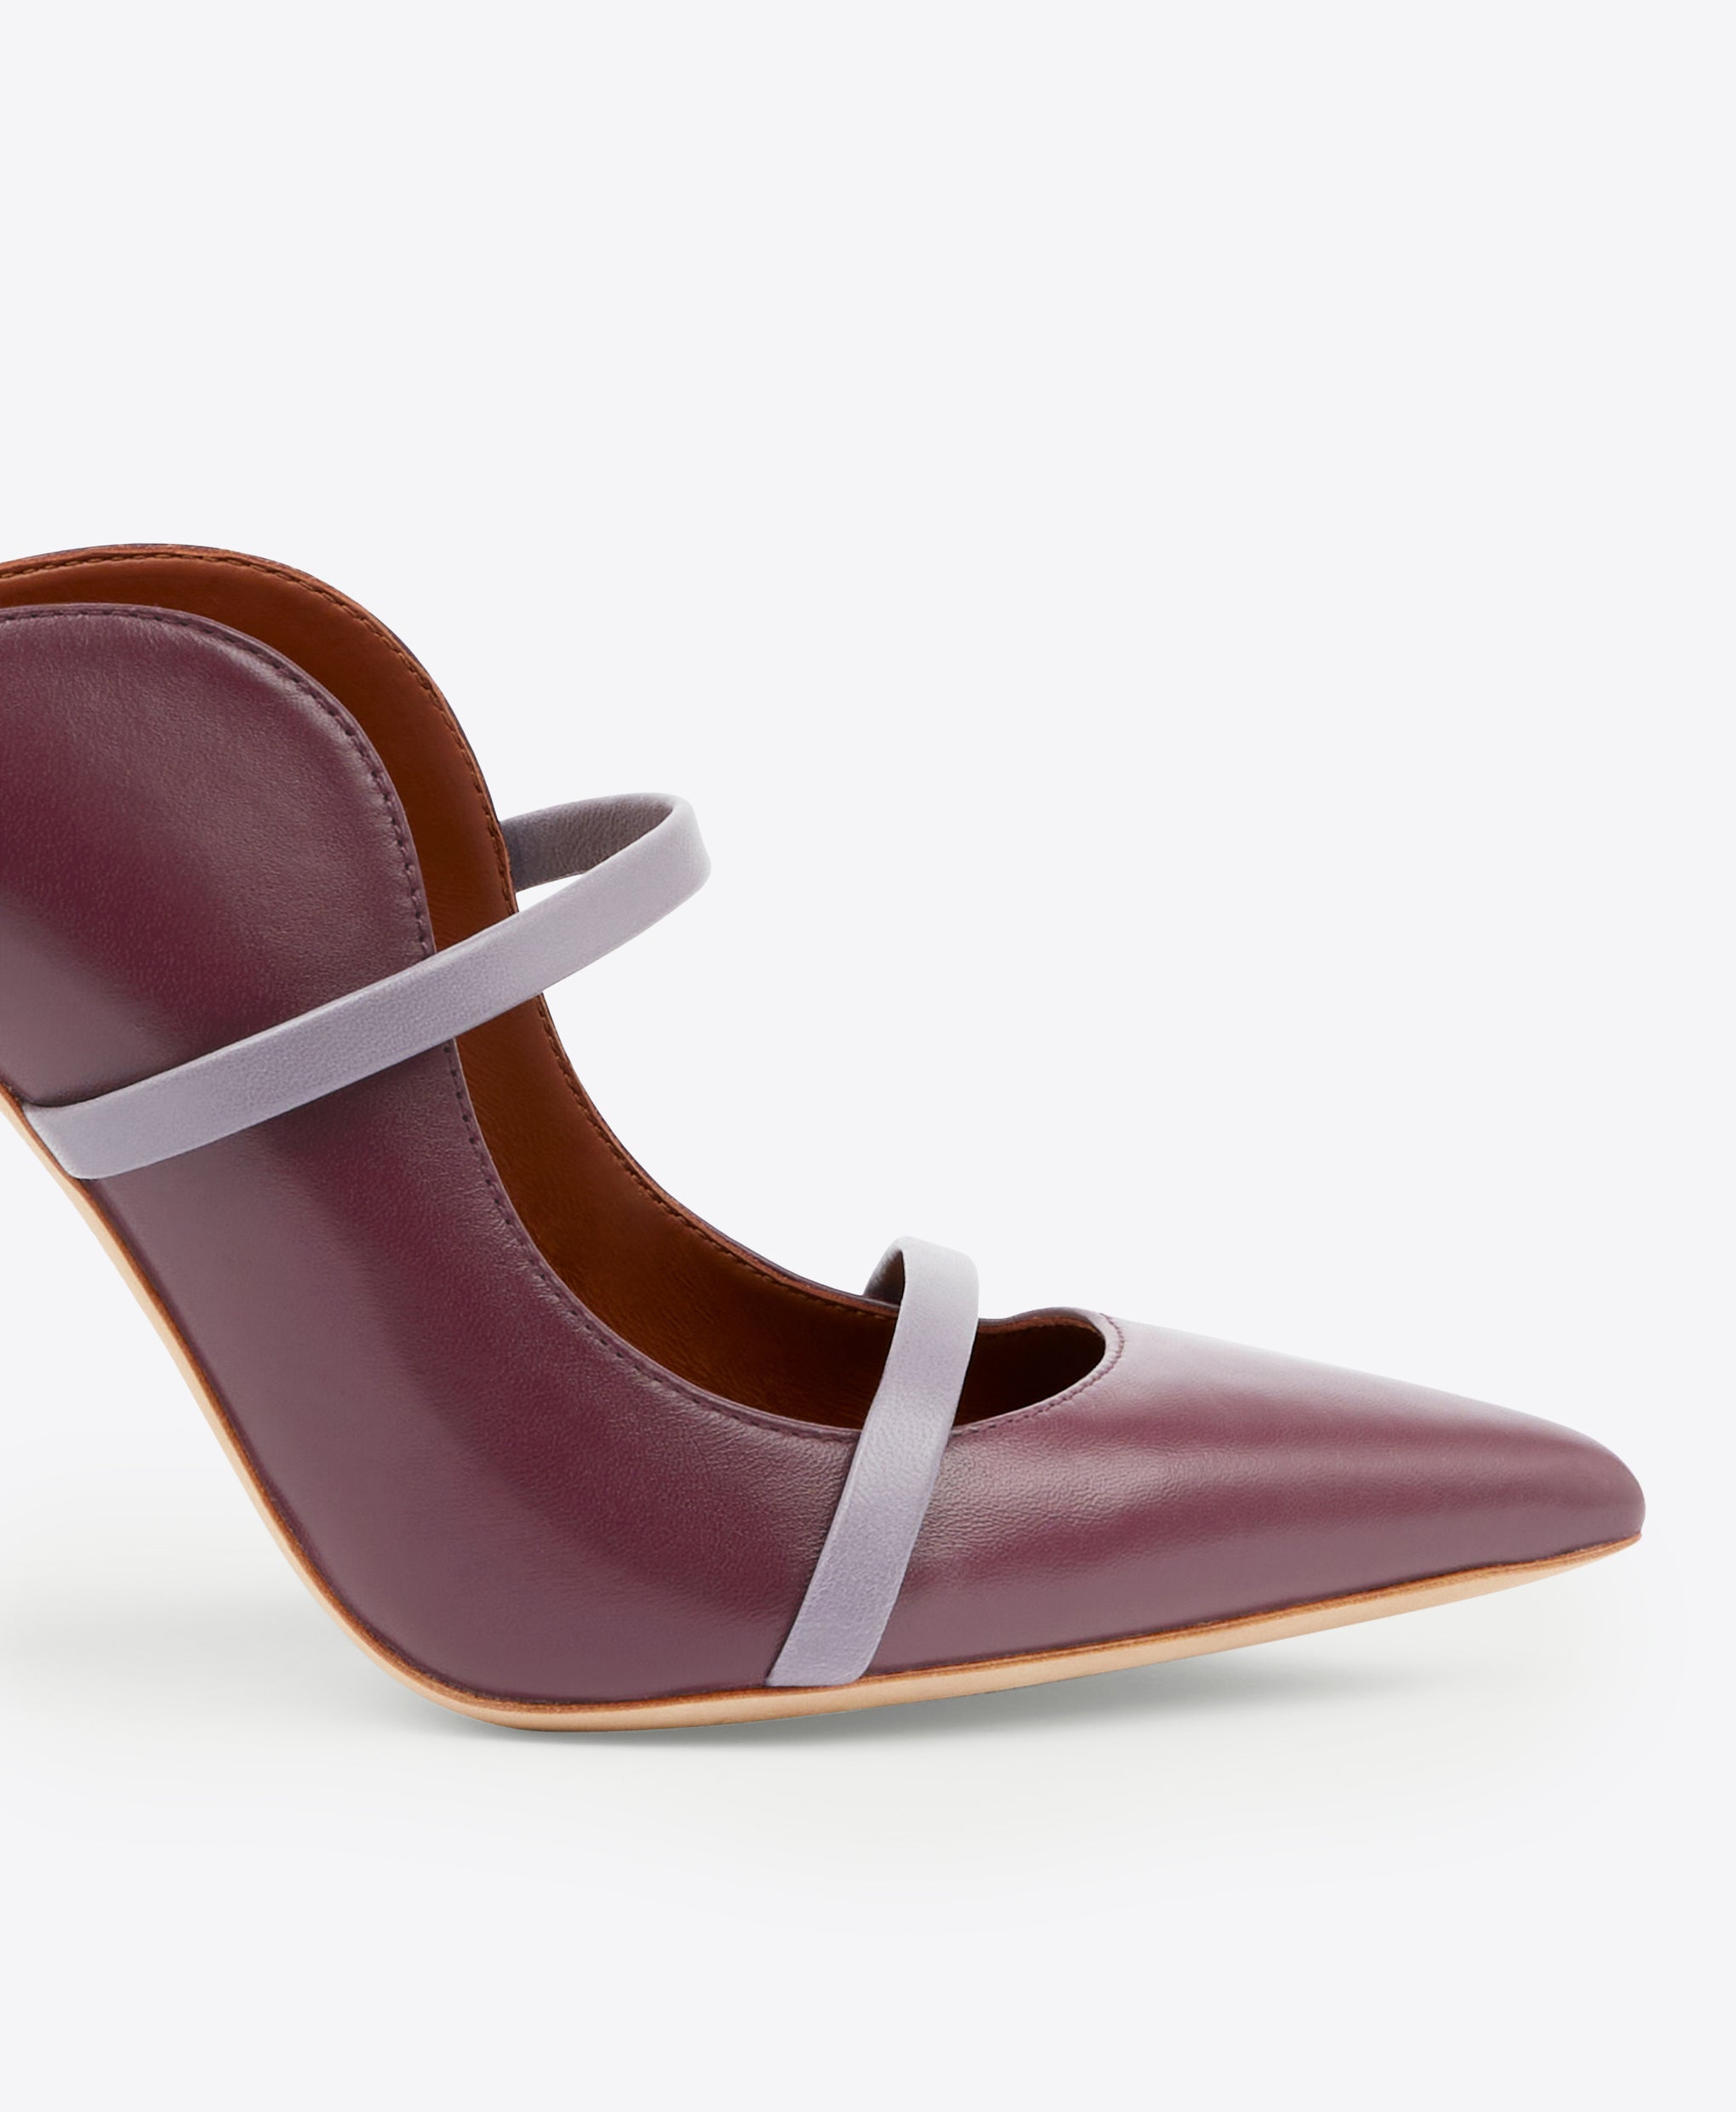 Women's Burgundy Leather Stiletto Mules Malone Souliers